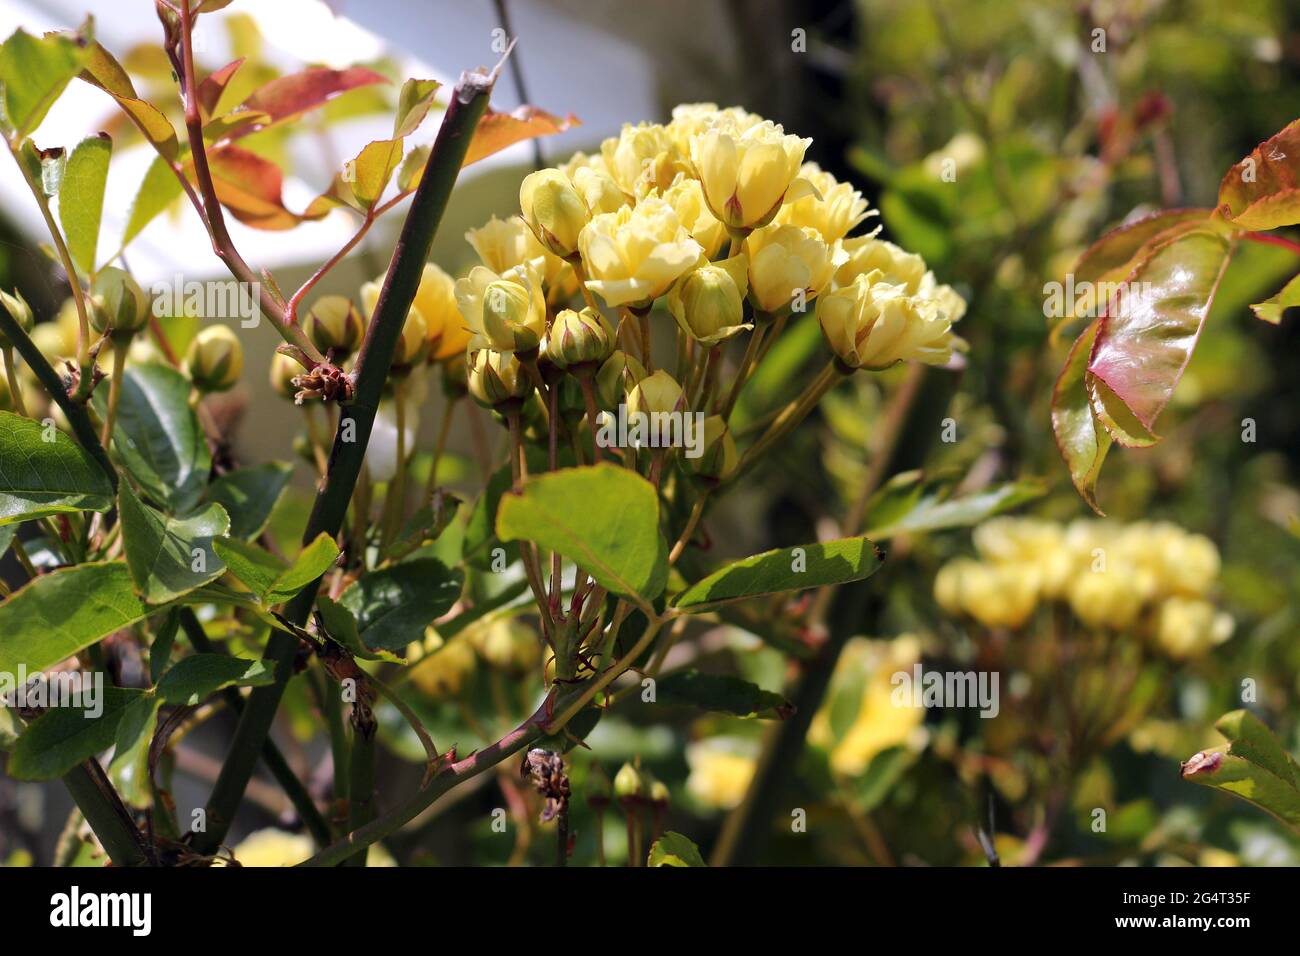 small yellow roses on a rose bush Stock Photo